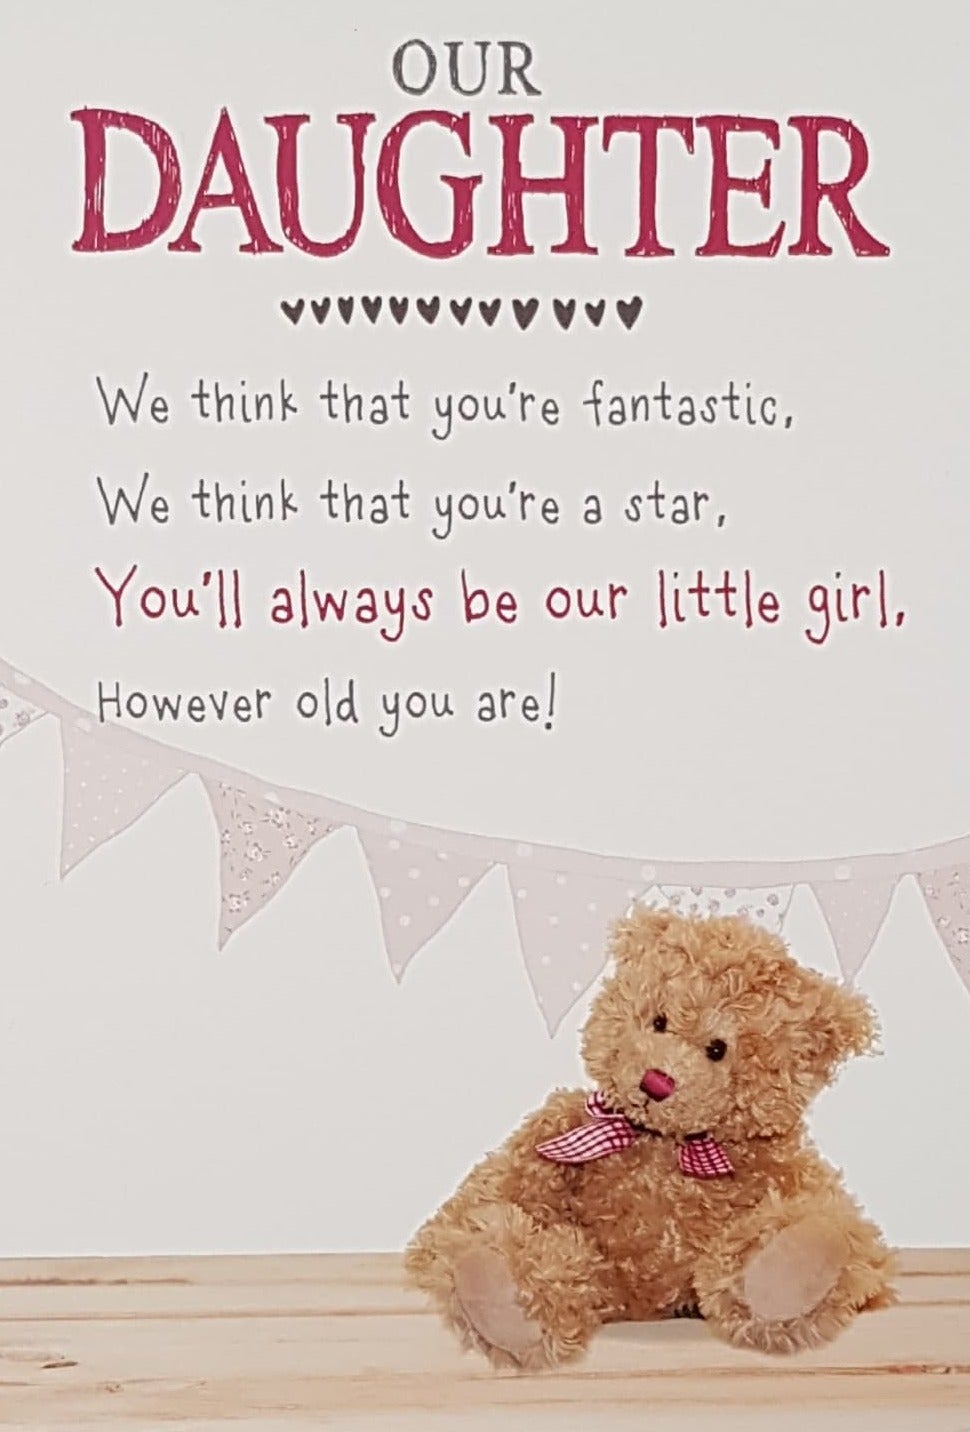 Birthday Card - Daughter / A Fluffy Teddy With A Red Bowtie